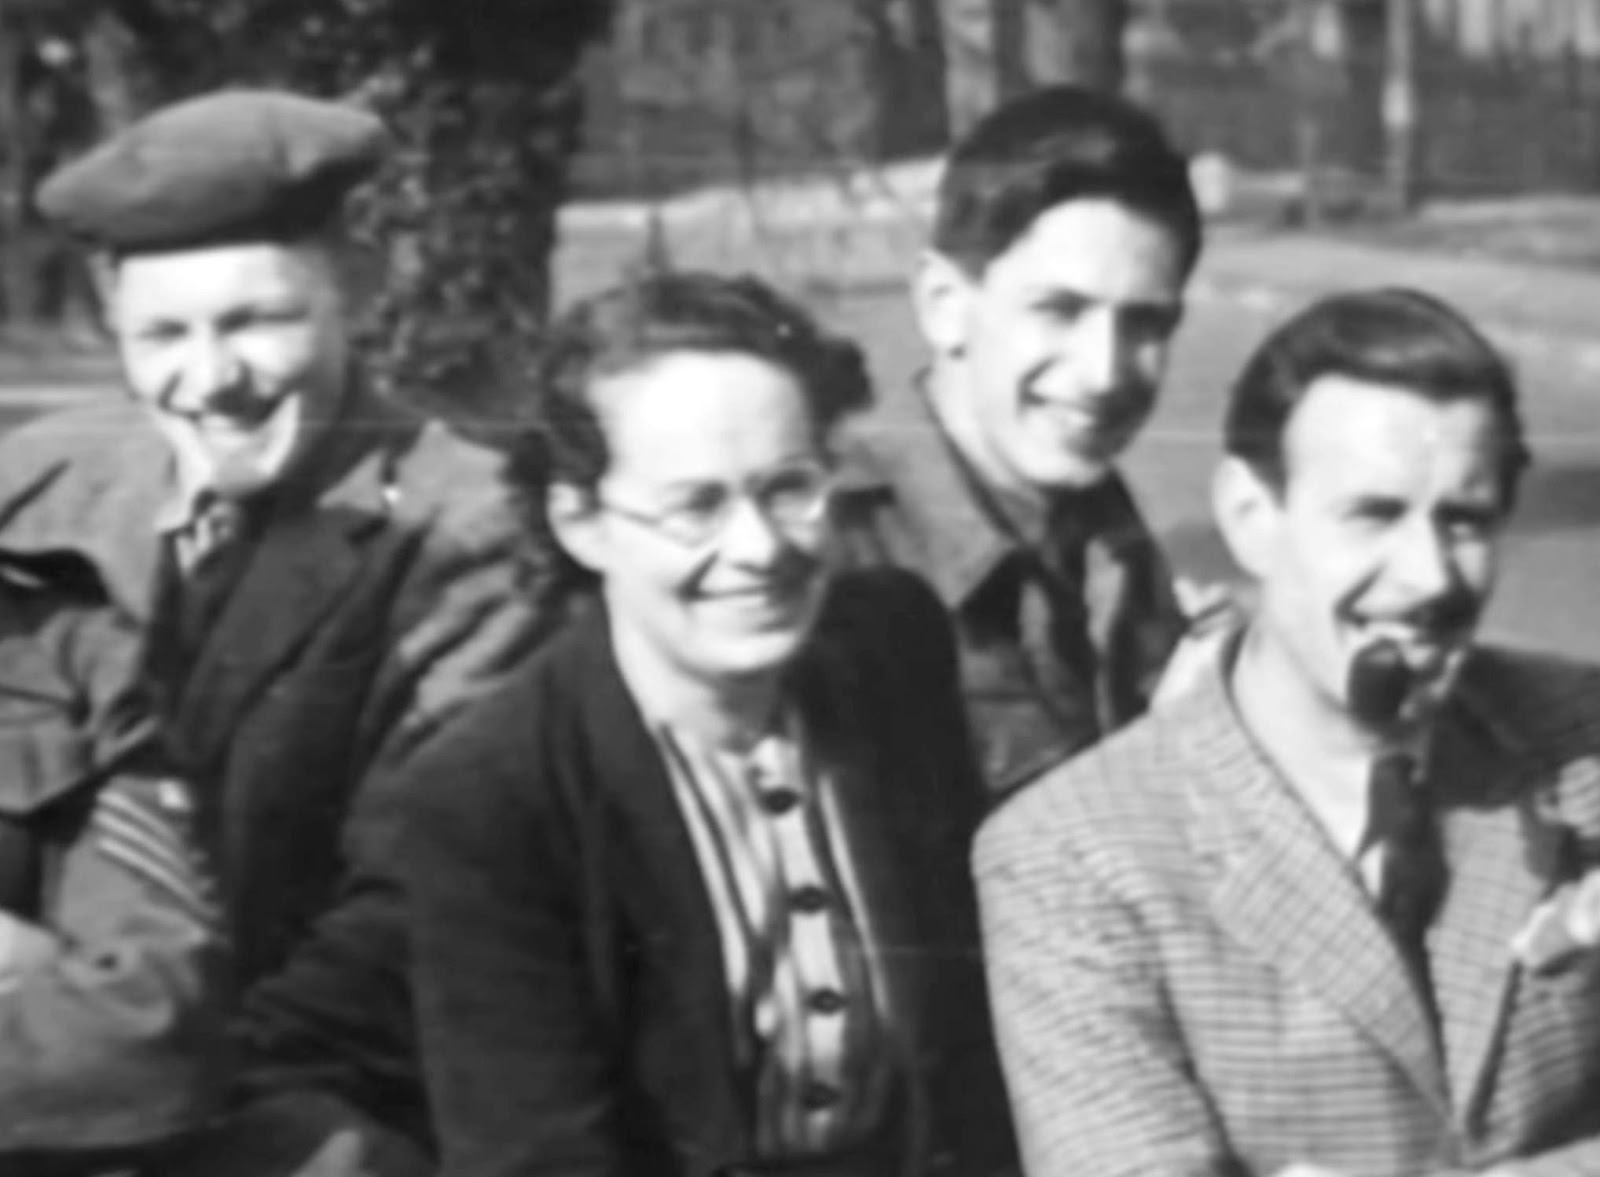 Alan Turing Proposed to his co-worker Joan Clarke at Bletchley Park where they both broke the Enigam Code